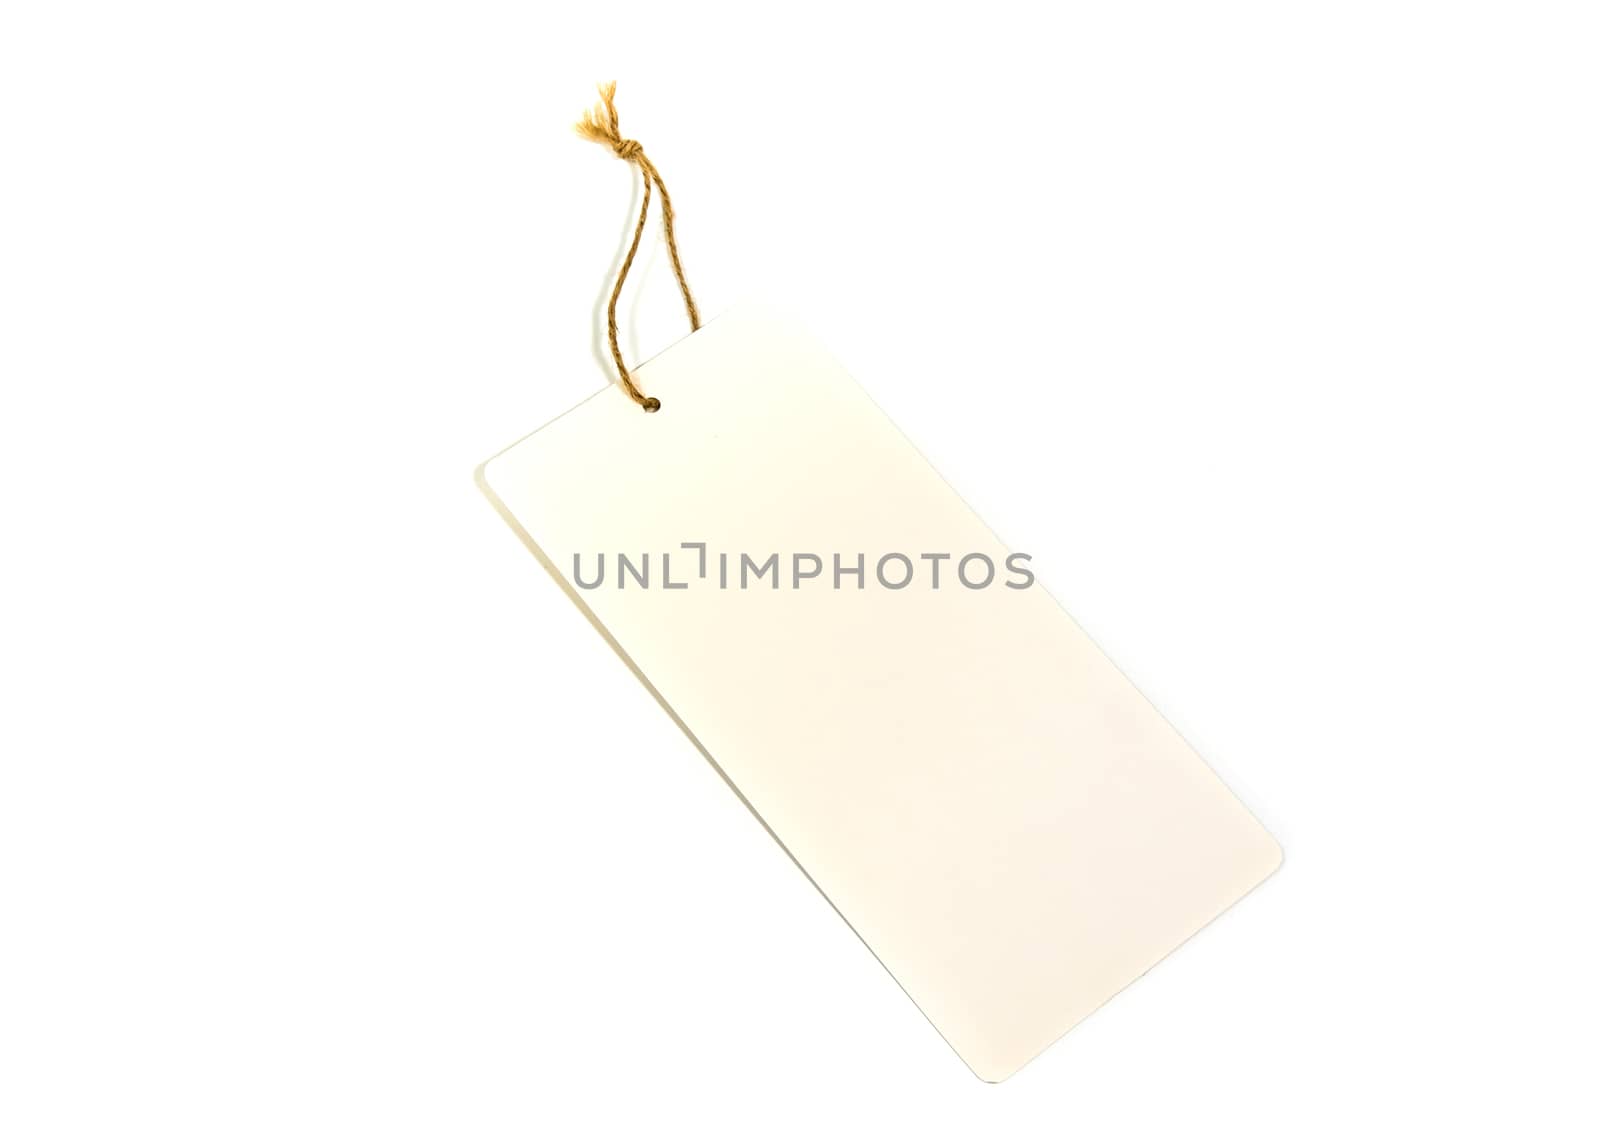 Blank white paper label on white background